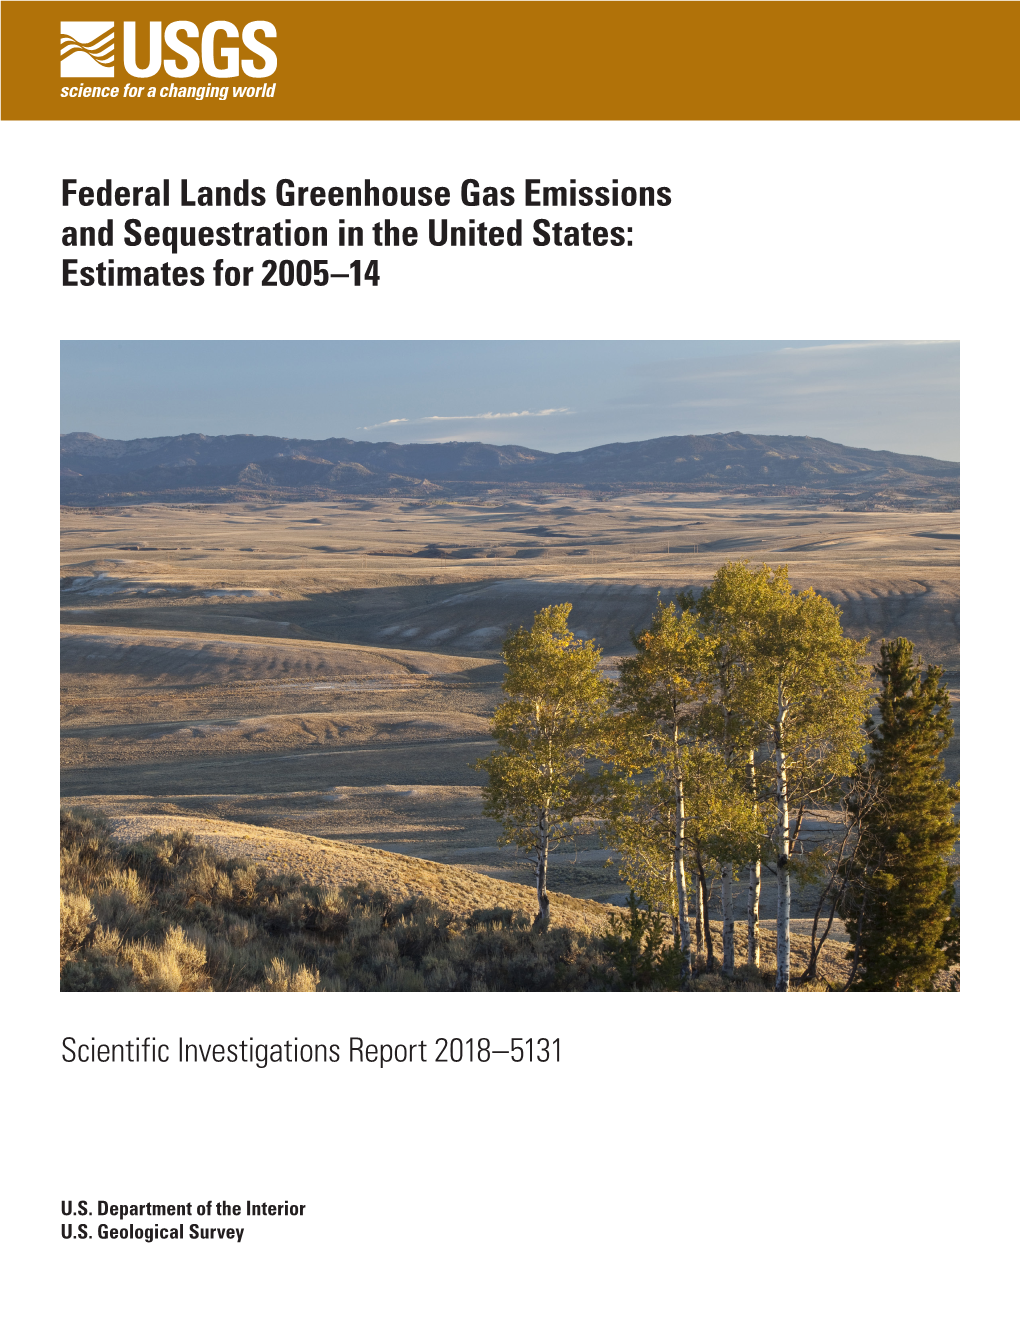 Greenhouse Gas Emissions and Sequestration in the United States: Estimates for 2005–14